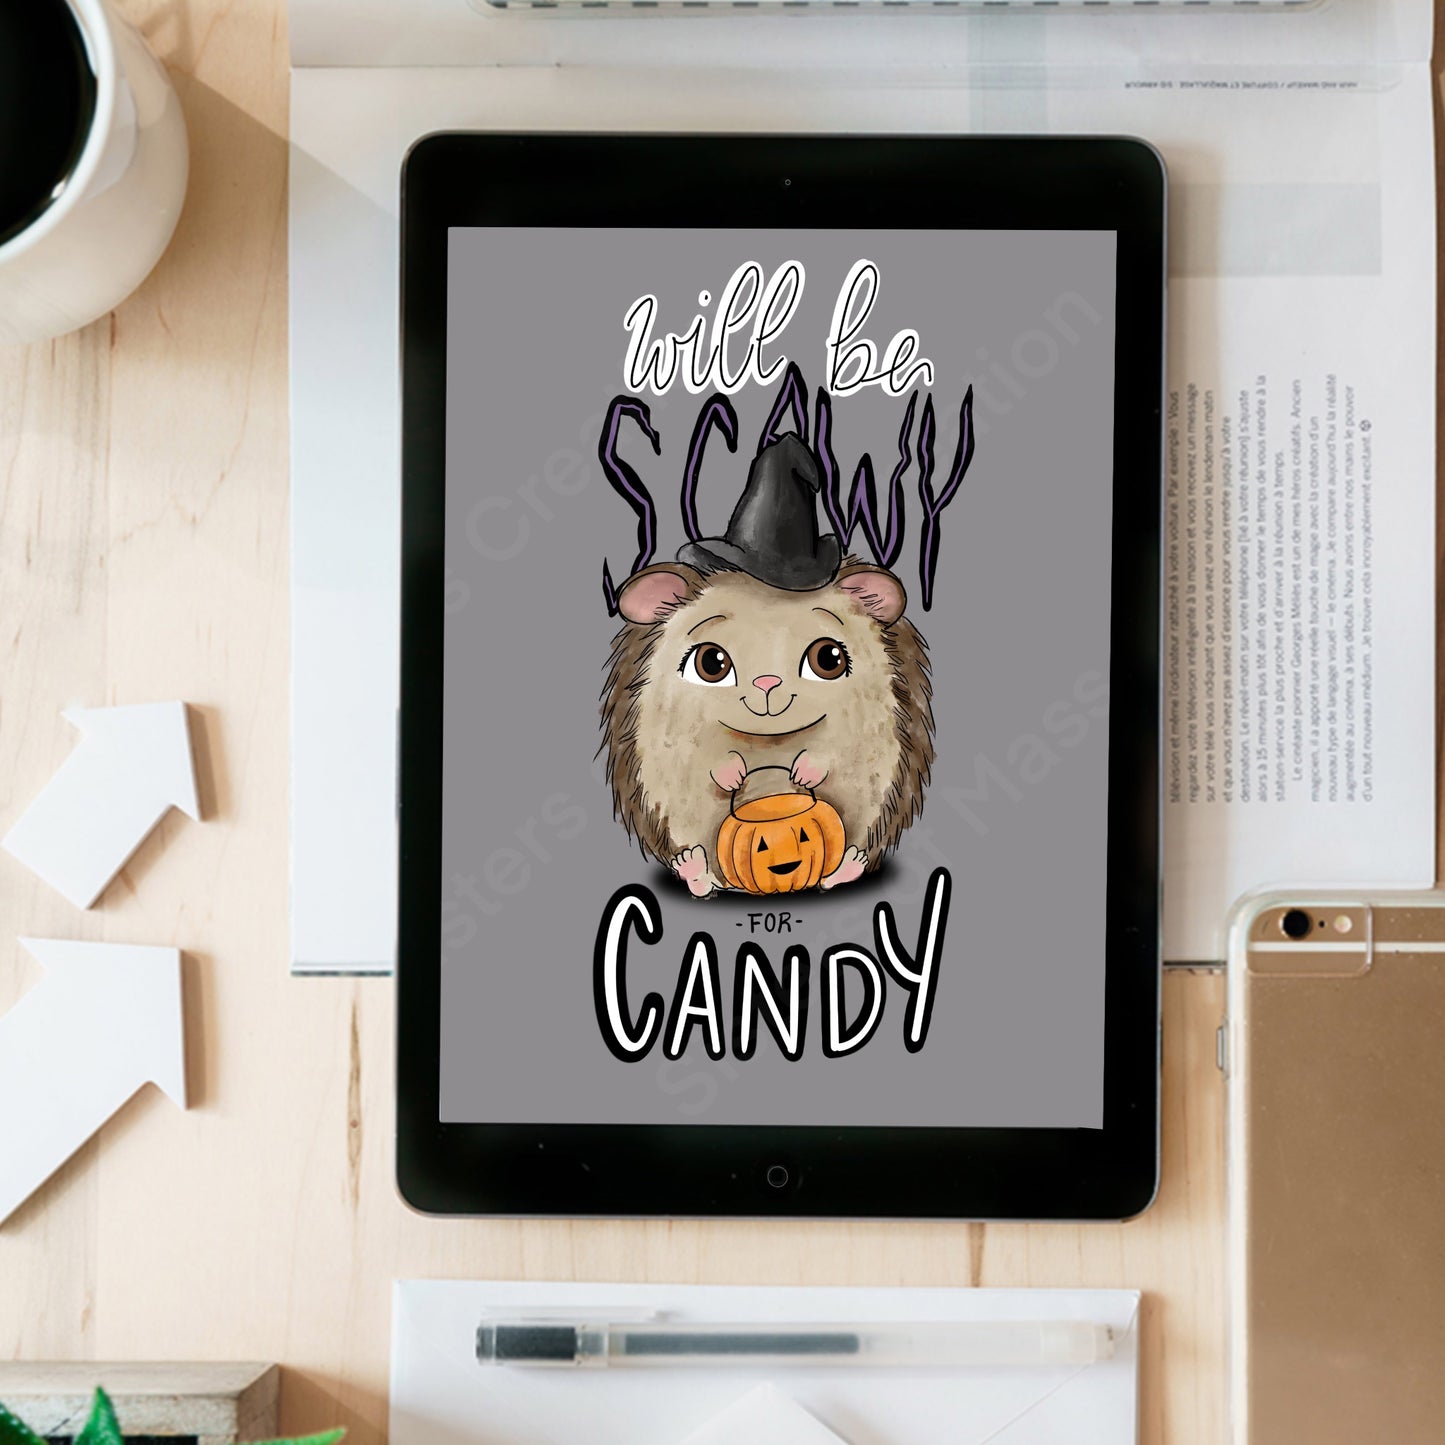 Will Be Scawy for Candy- instant download digital printable artwork- Halloween Decor